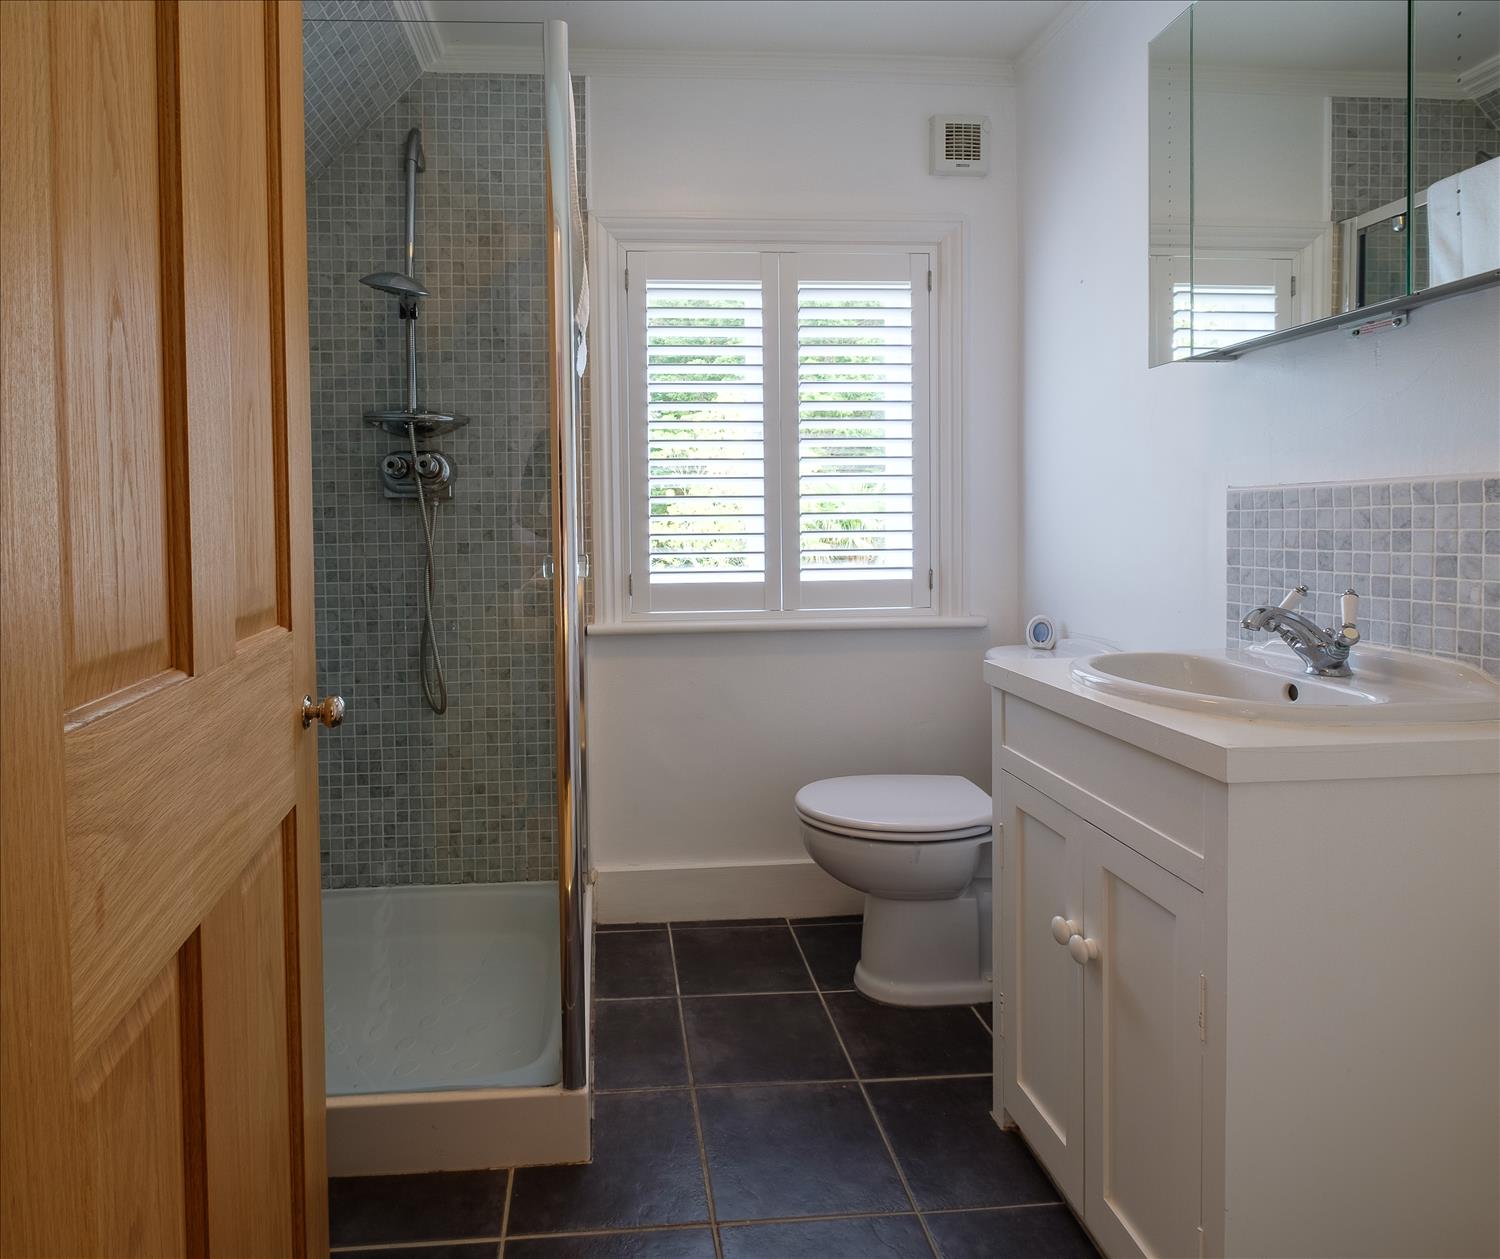 En suite bathroom at our luxury holiday cottage